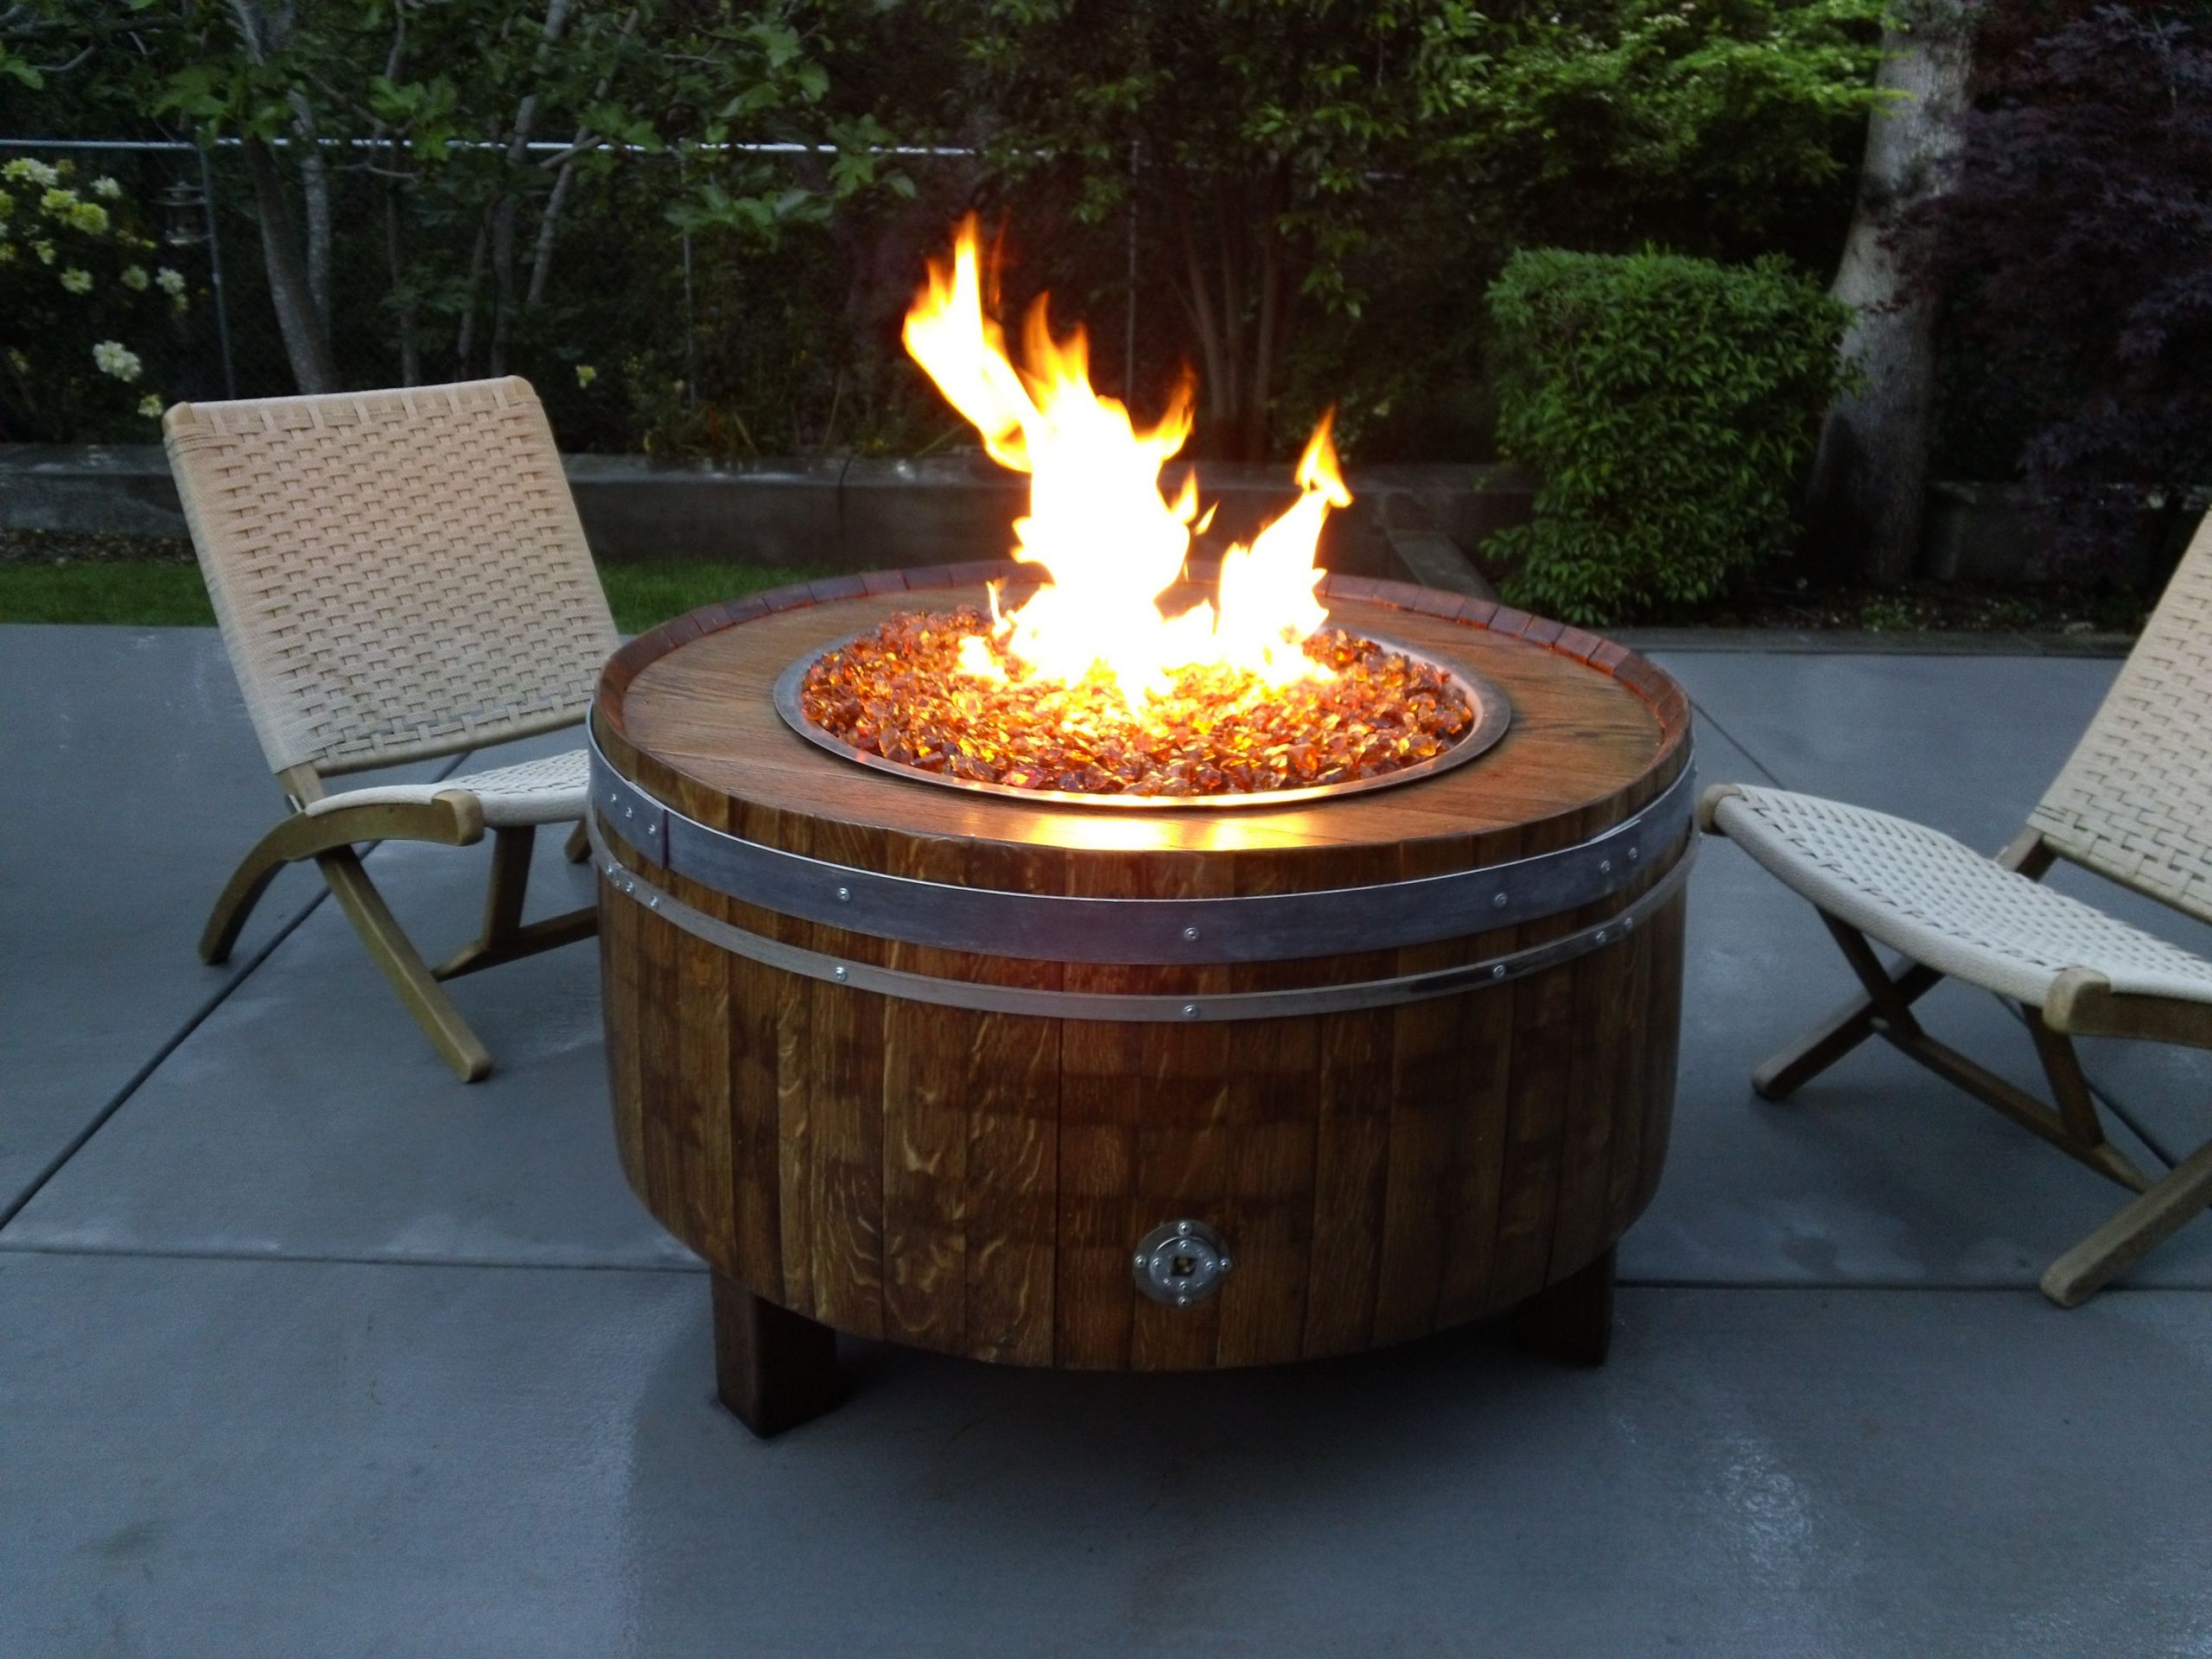 DIY Outdoor Propane Fire Pit
 Wine Barrel Fire Pits Sonoma County Fire Pits SHOP